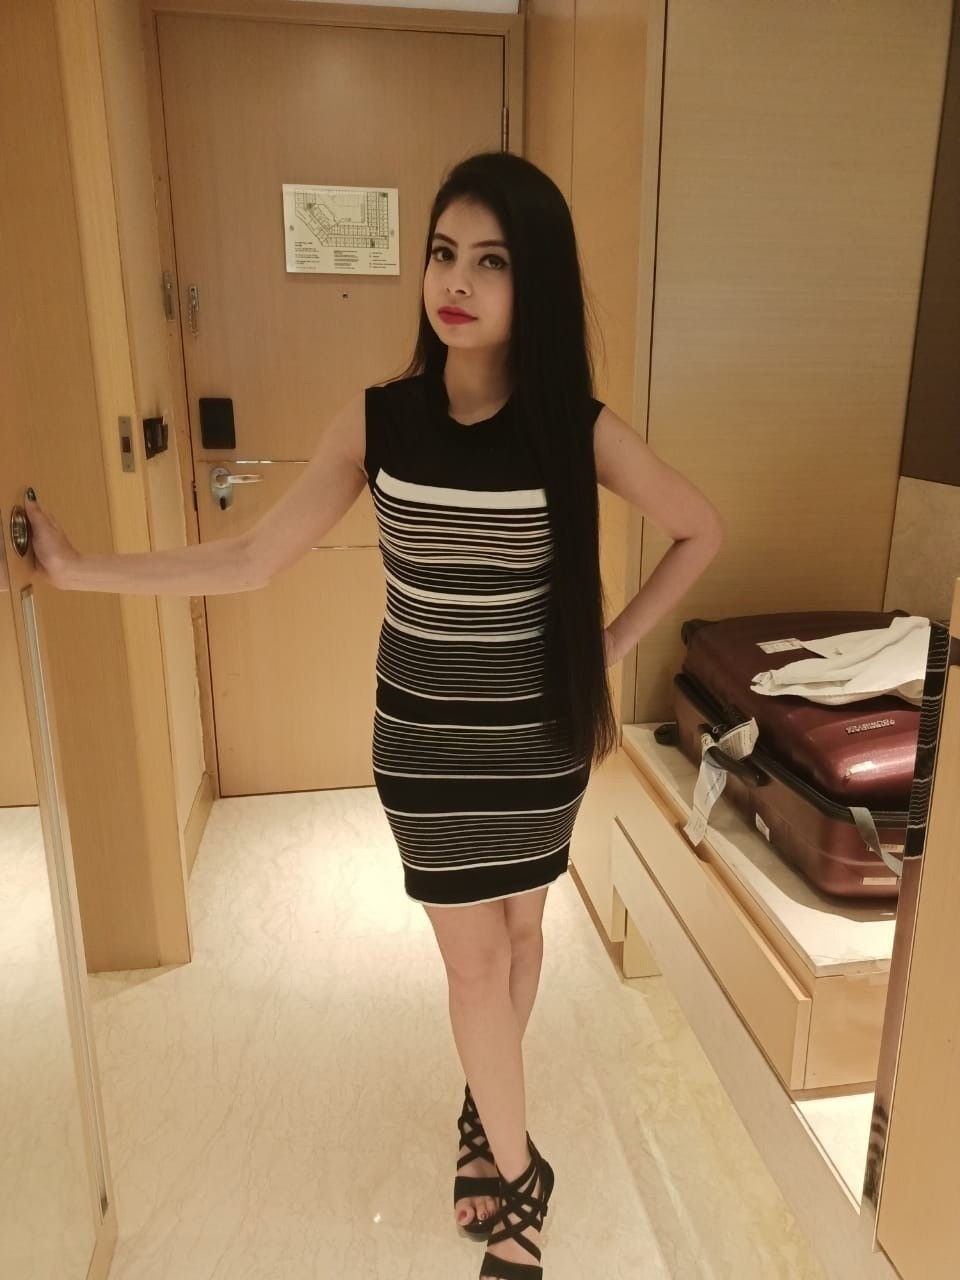 Call girl in Chanakya Puri - Just Call Girls In Nehru Place 85888_Vip_14909 Hotel Home Delivery Delhi NCr